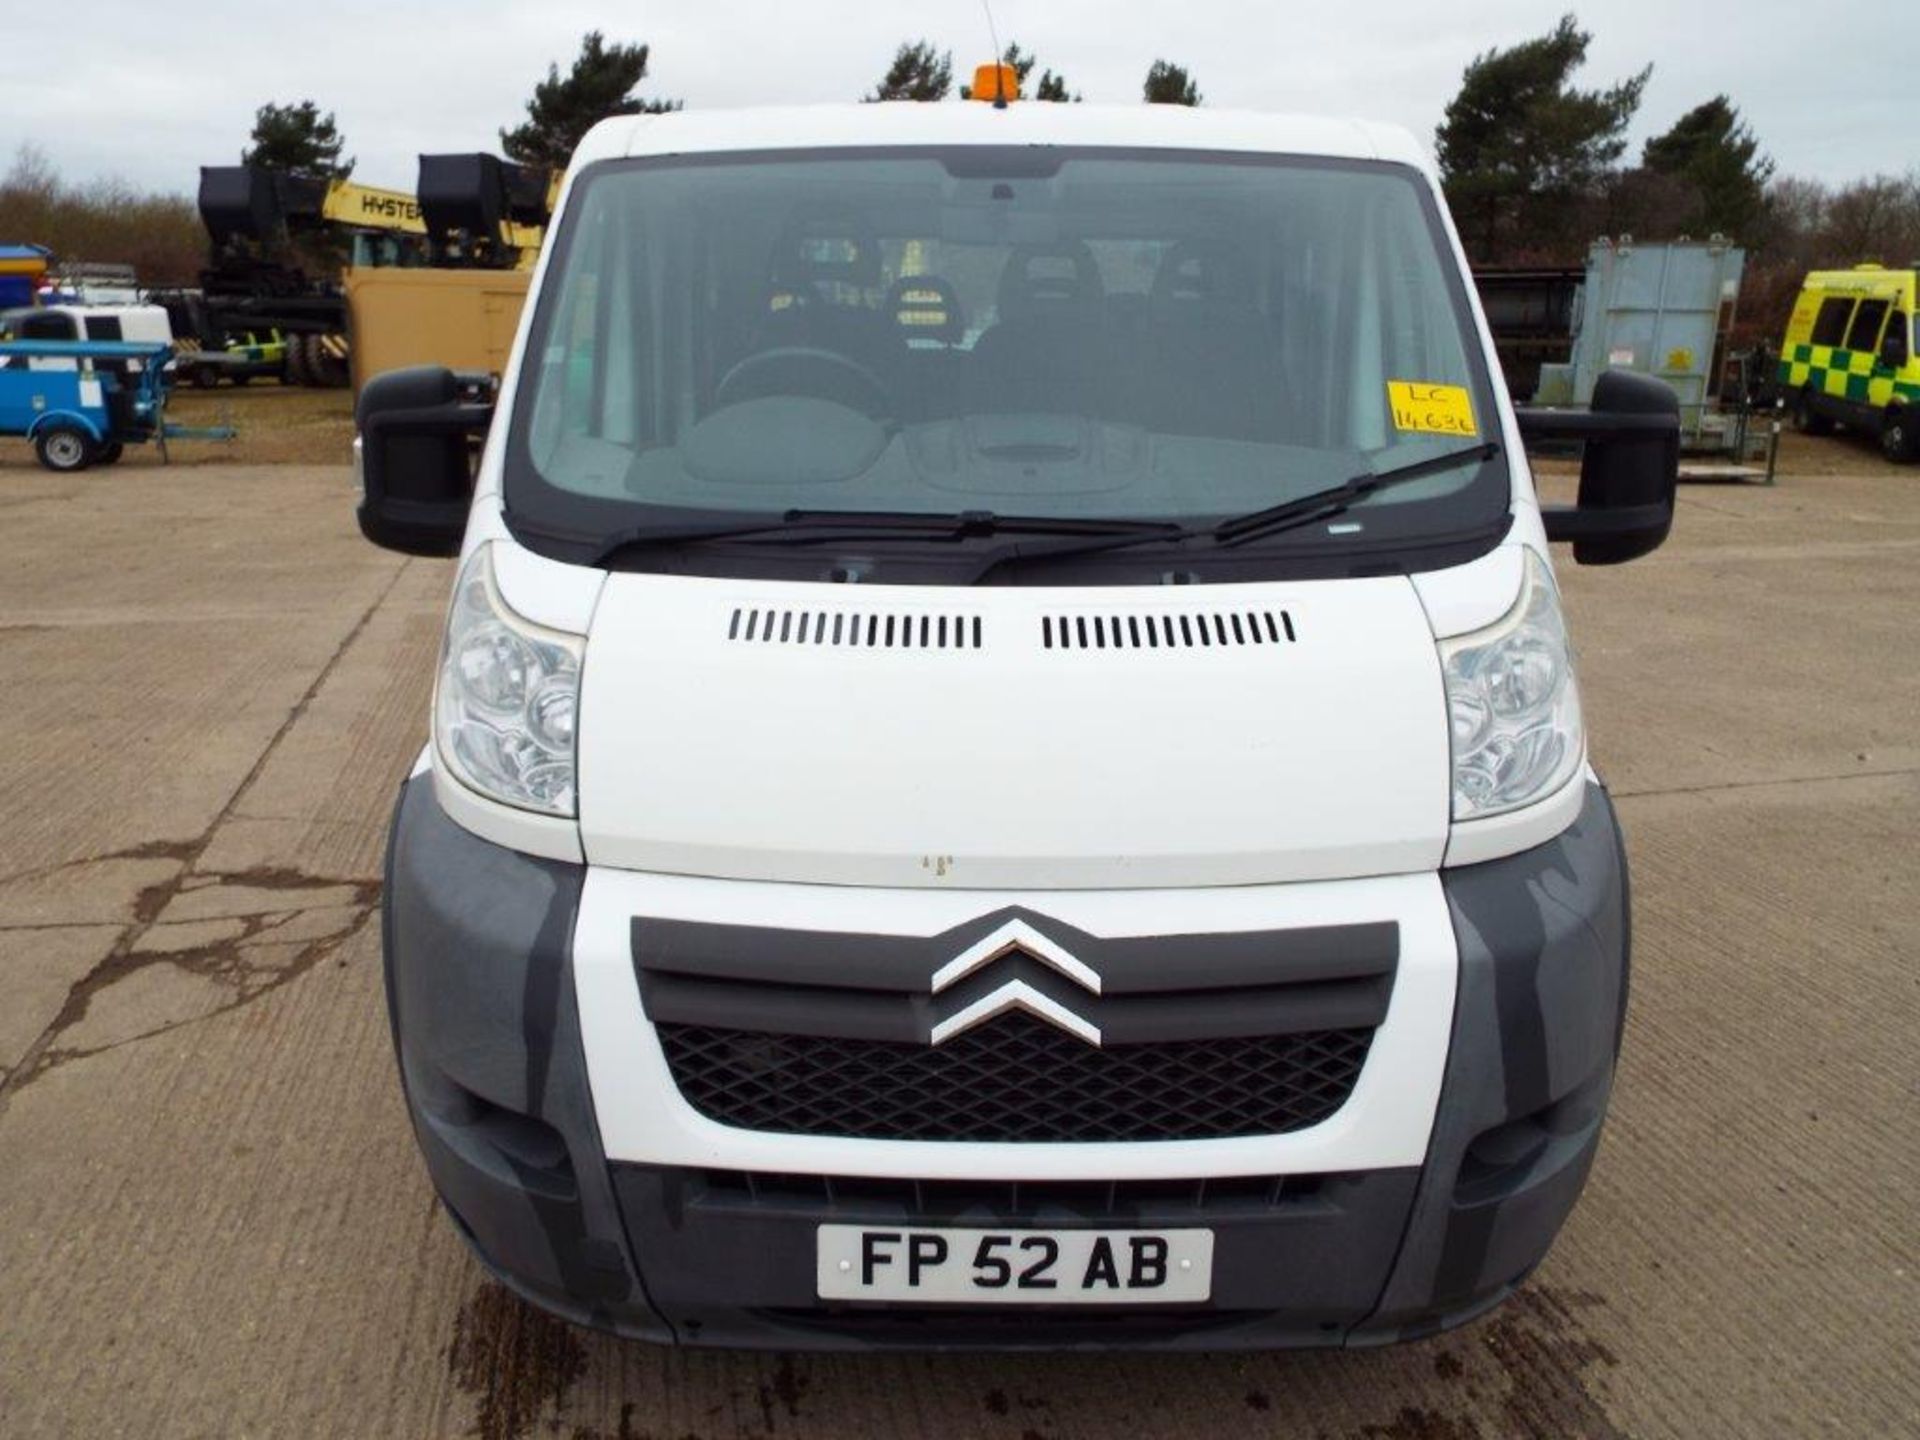 Citroen Relay 7 Seater Double Cab Dropside Pickup with 500kg Ratcliff Palfinger Tail Lift - Image 2 of 29